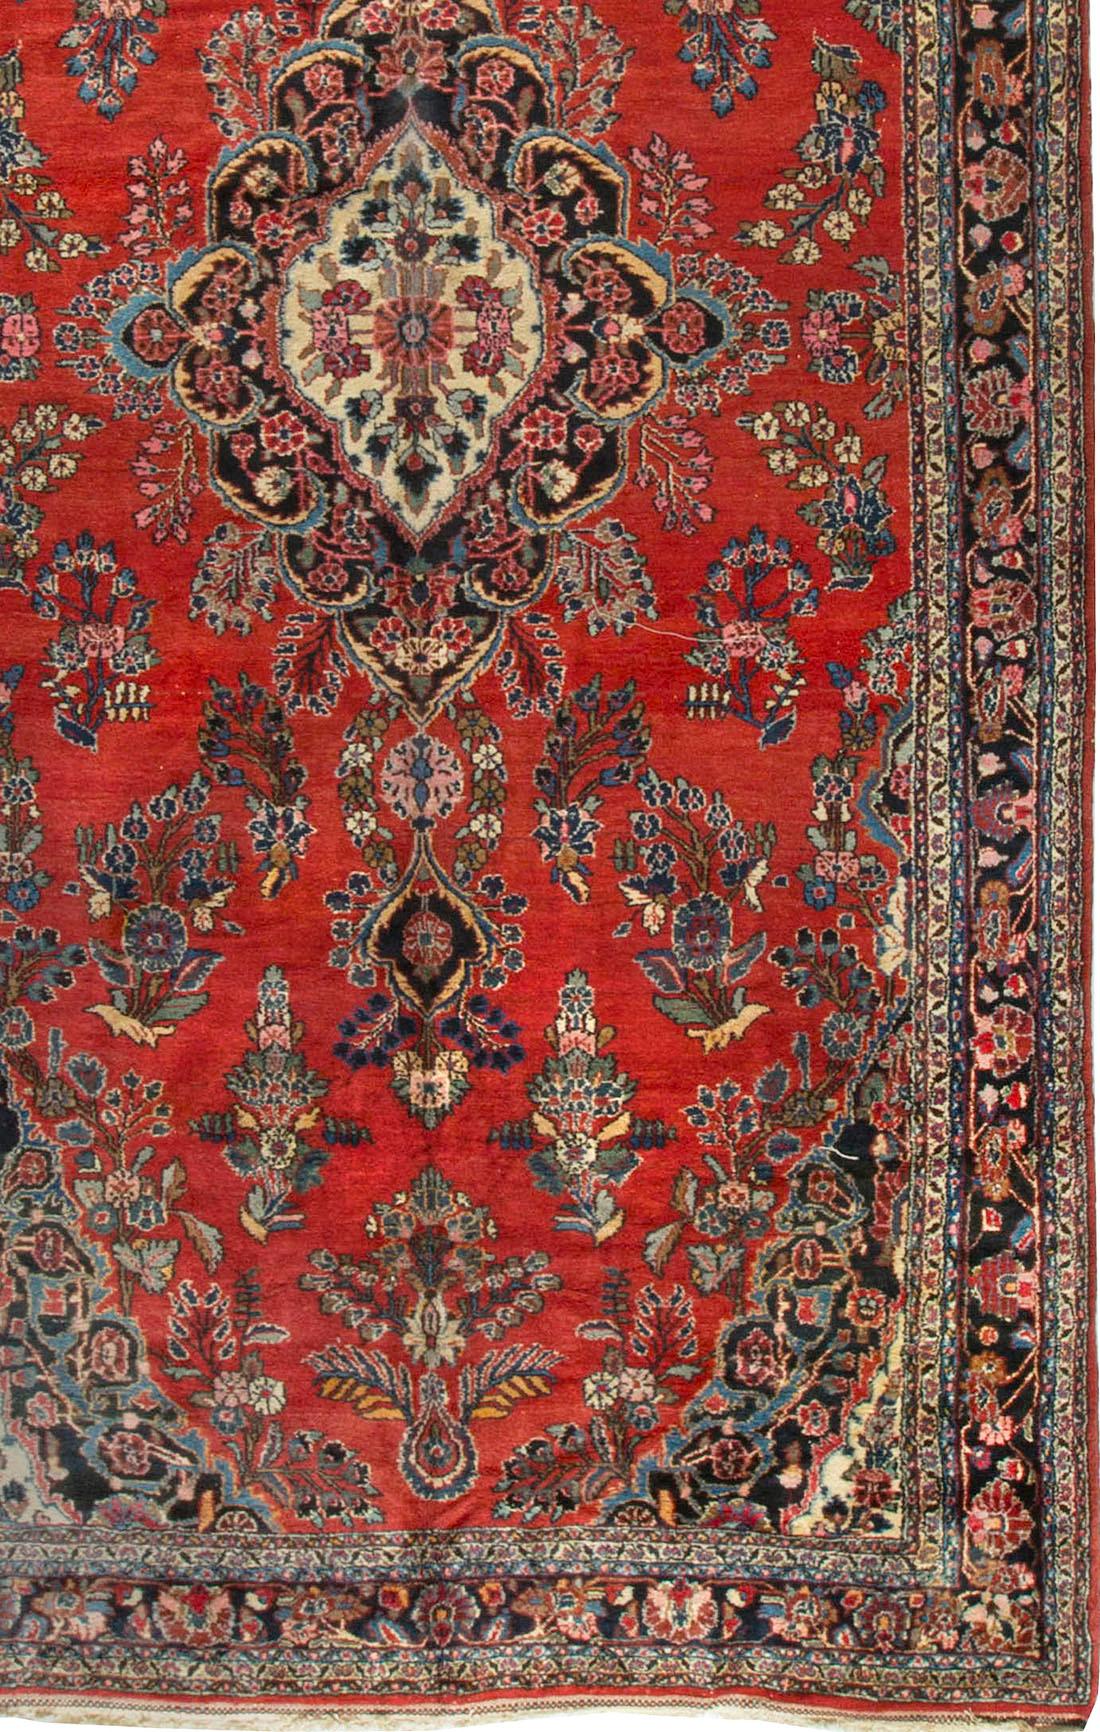 Vintage Persian Kazvin Rug, circa 1940. A rare an unusual size. This 1940s Persian Rug has a harmony and feel that will add distinction to any room. Kazvin or Gazvin is situated about 100 miles west of Tehran and produced carpets up to around 1950.